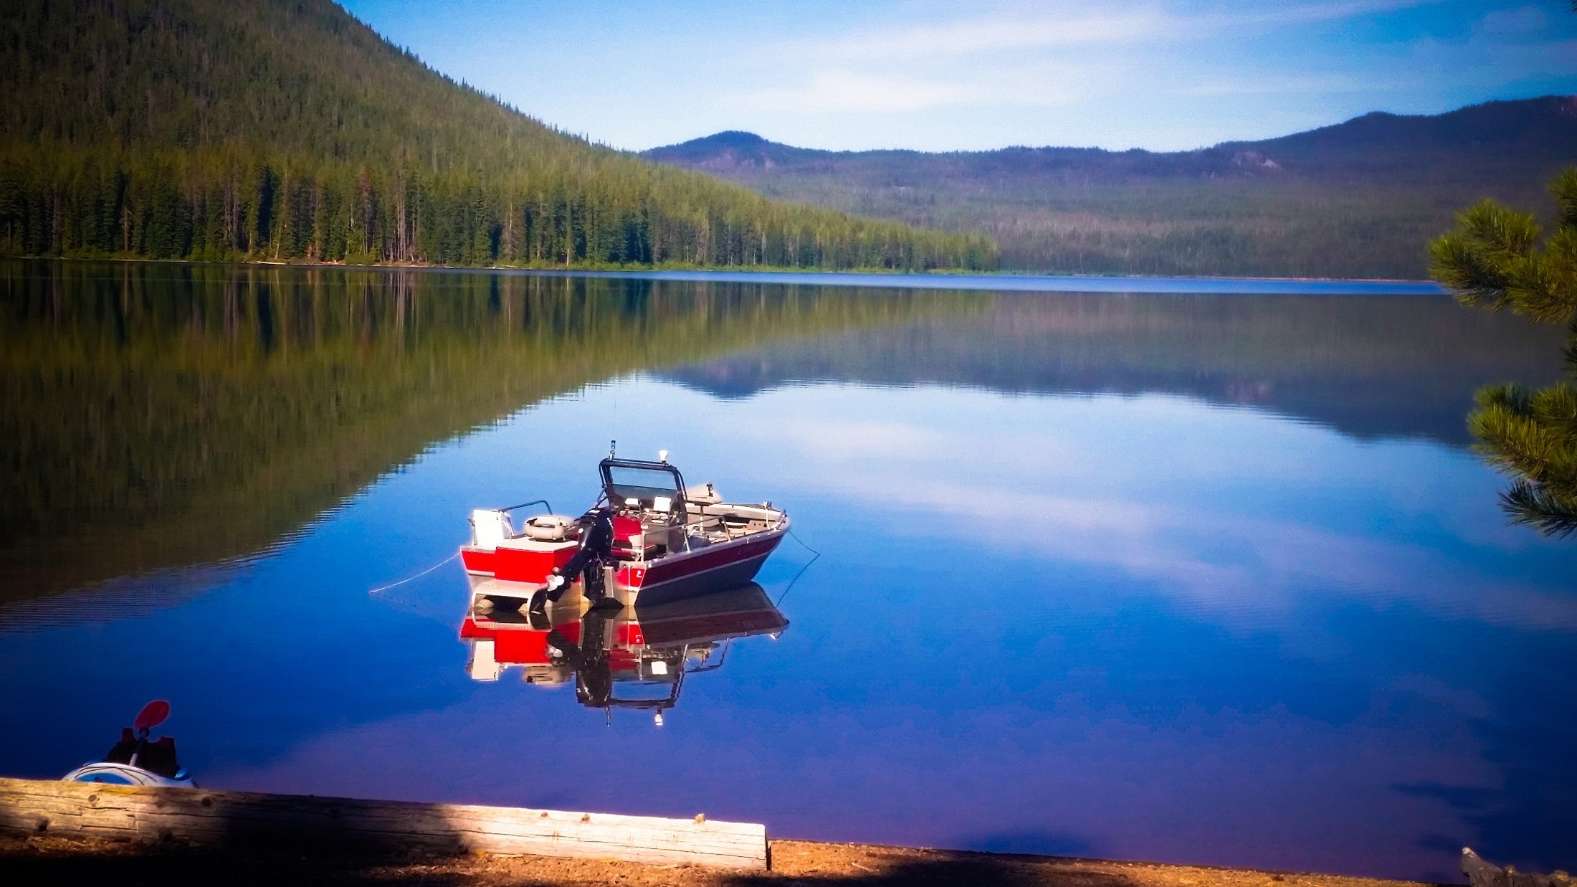 red and white boat in still lake surrounded by forested mountains